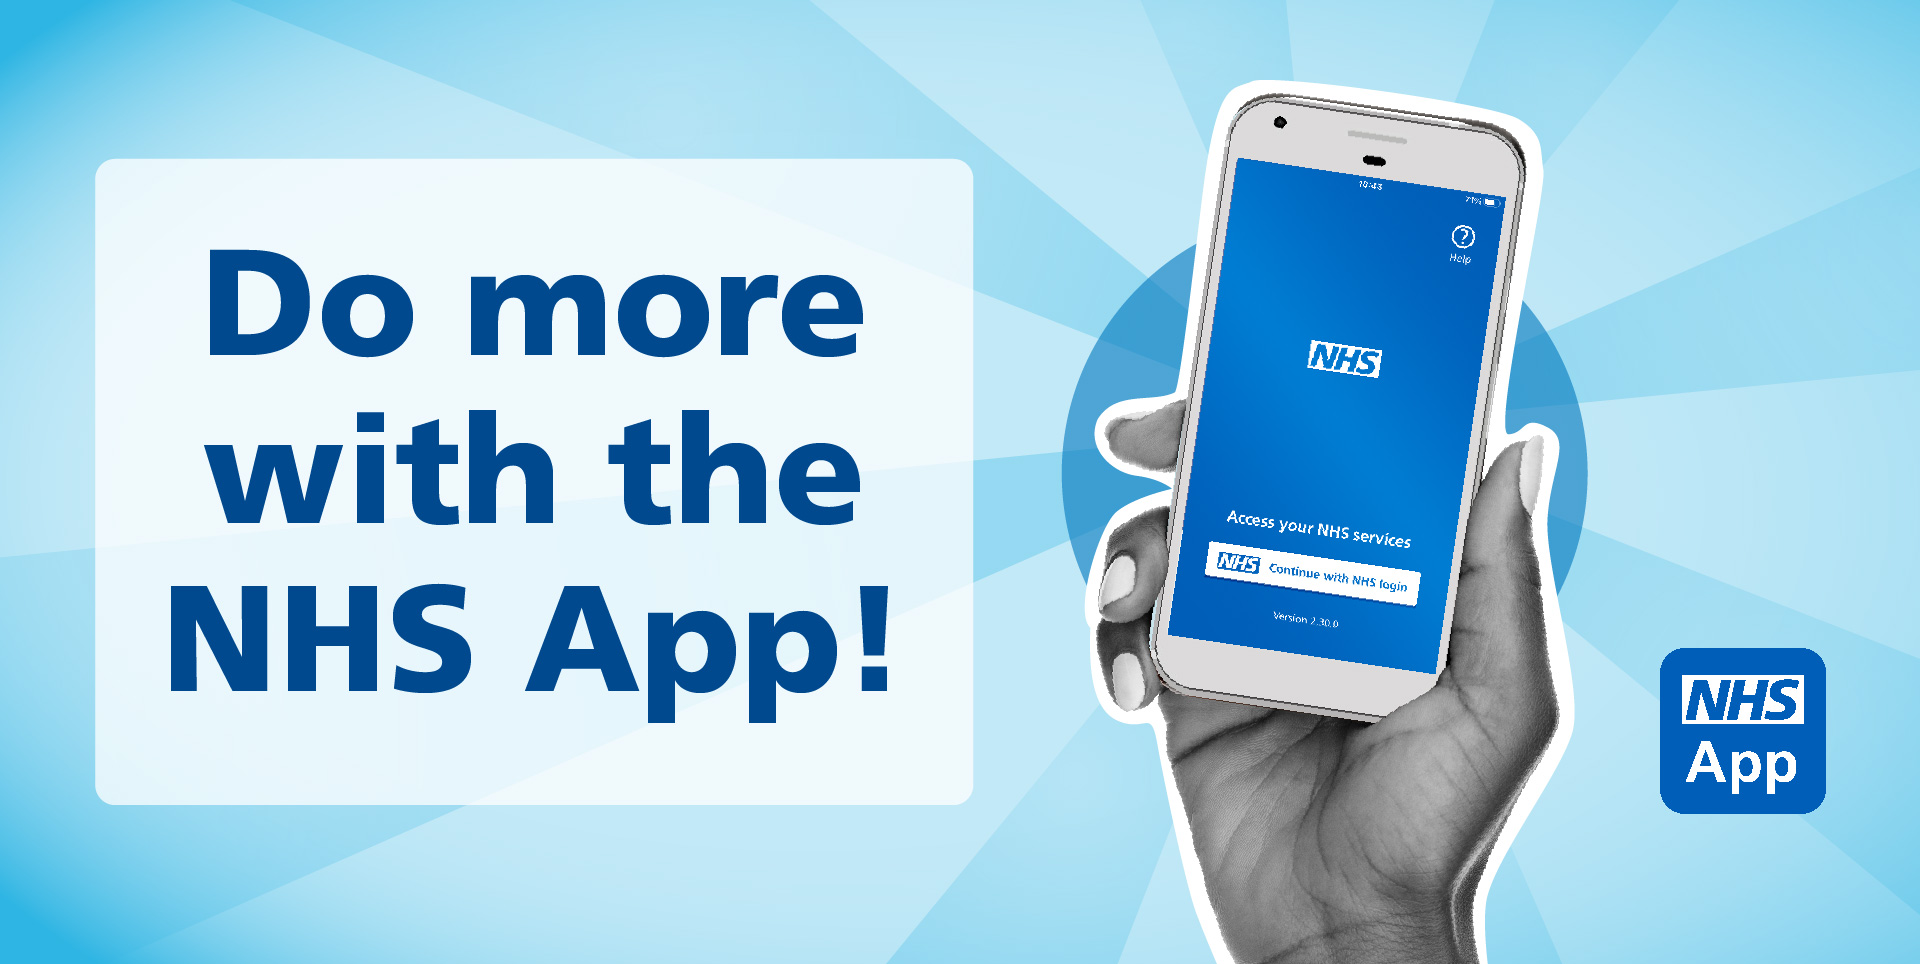 Changes to the NHS App